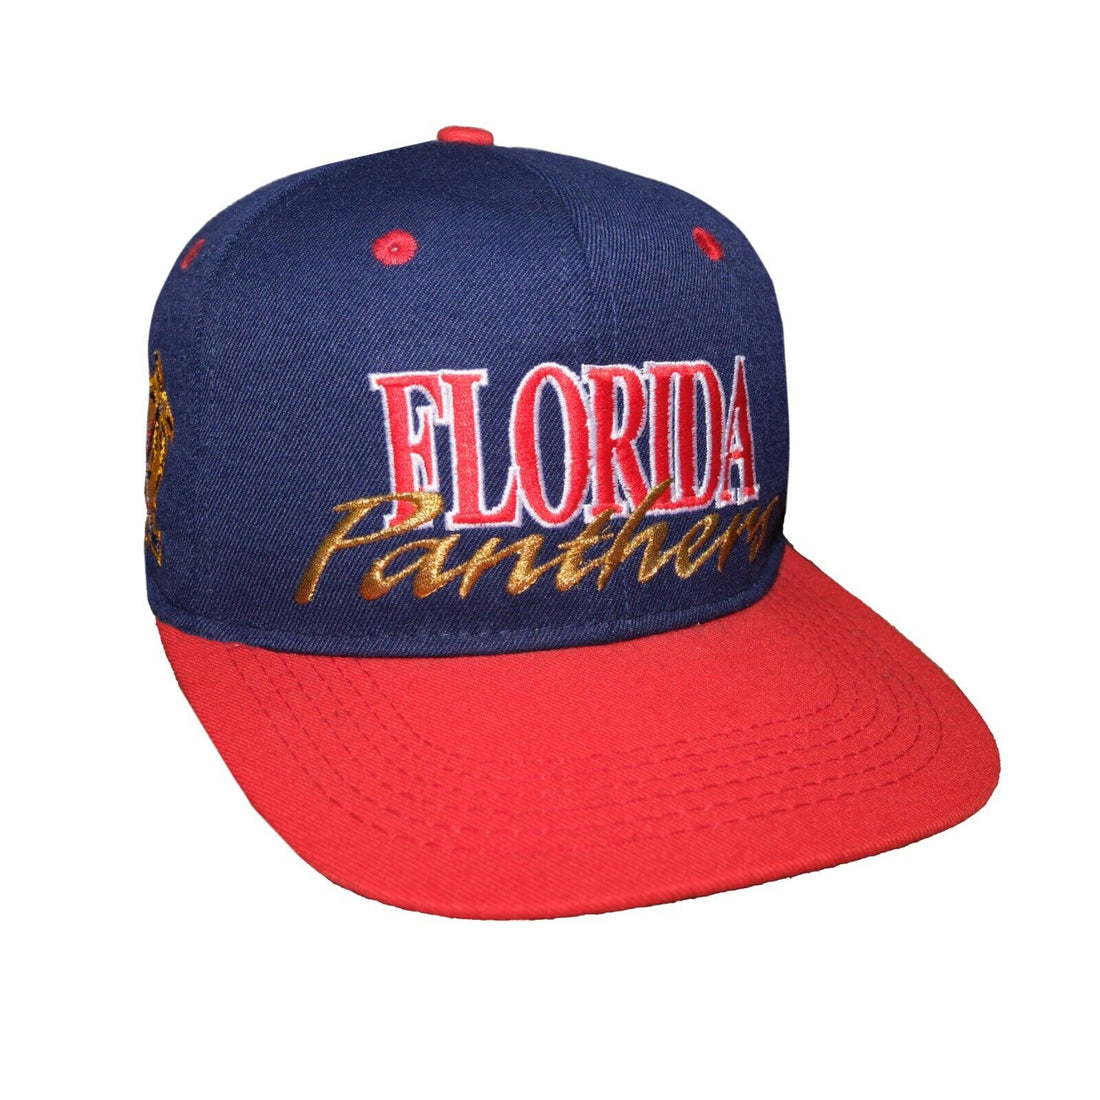 Vintage Florida Panthers #1 Apparel Fitted Hat Size 6 3/4 NHL